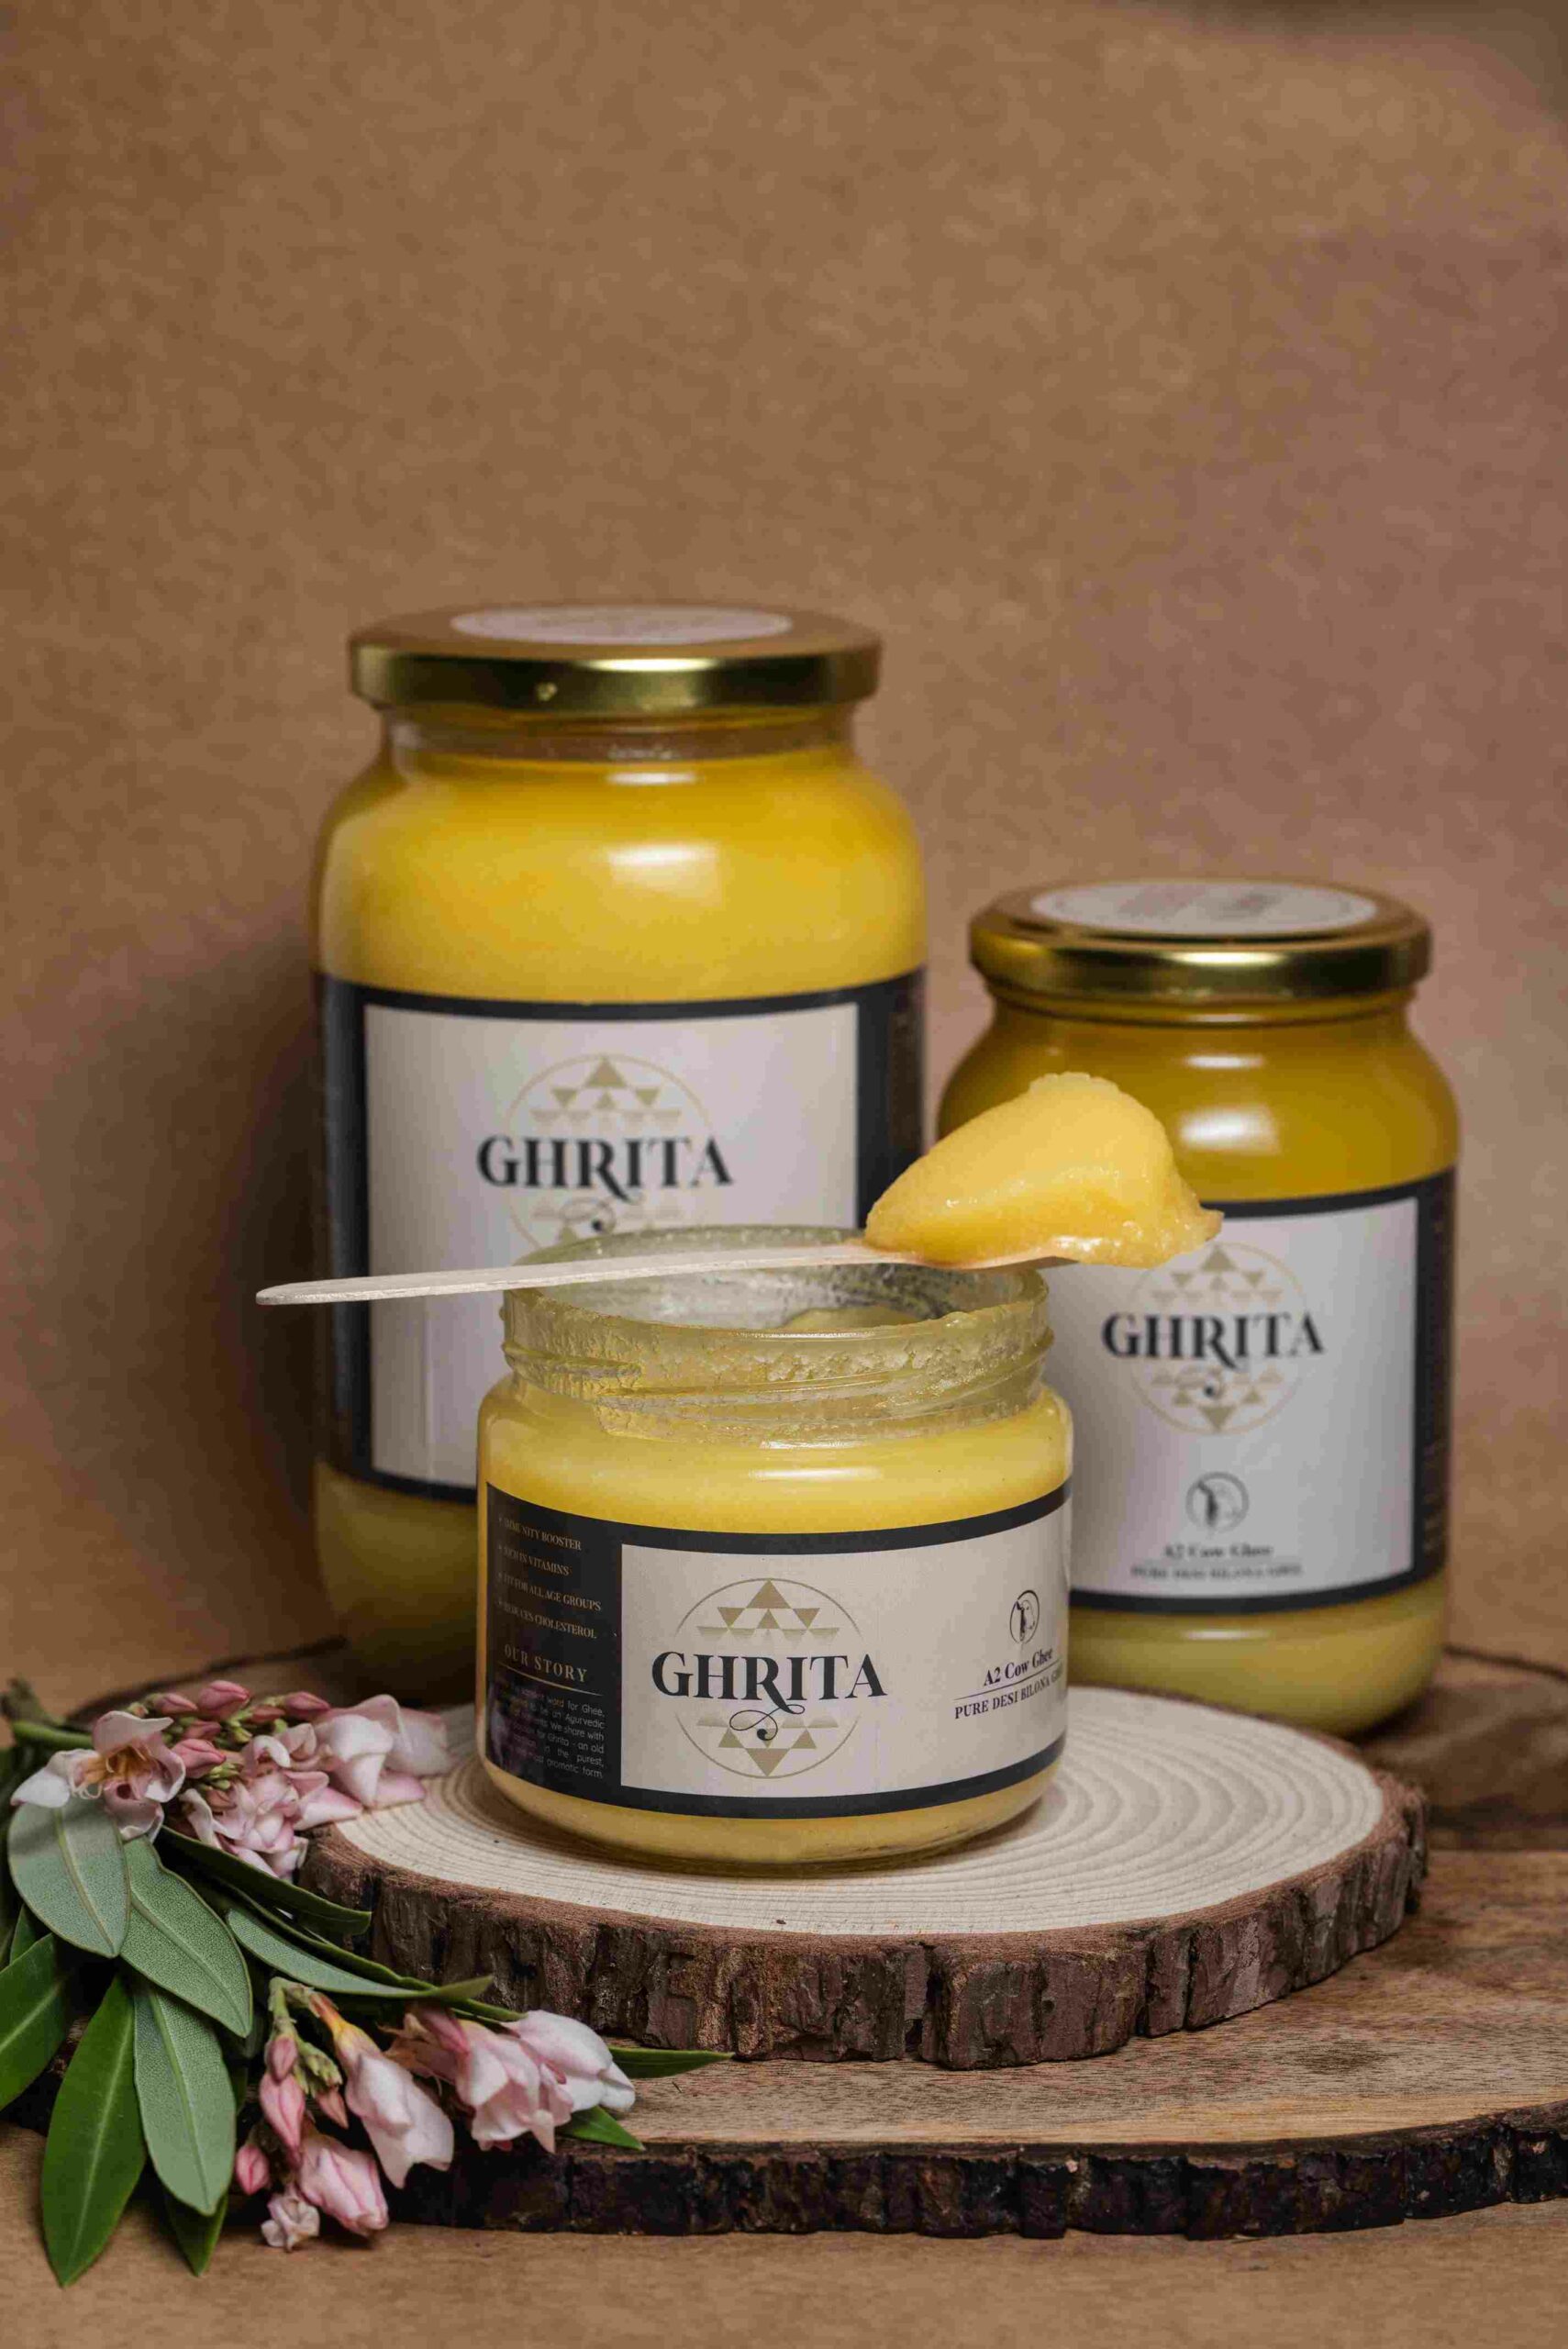 The ghee sold is from A2 cow milk and is one of the highlights of Shankar Farms